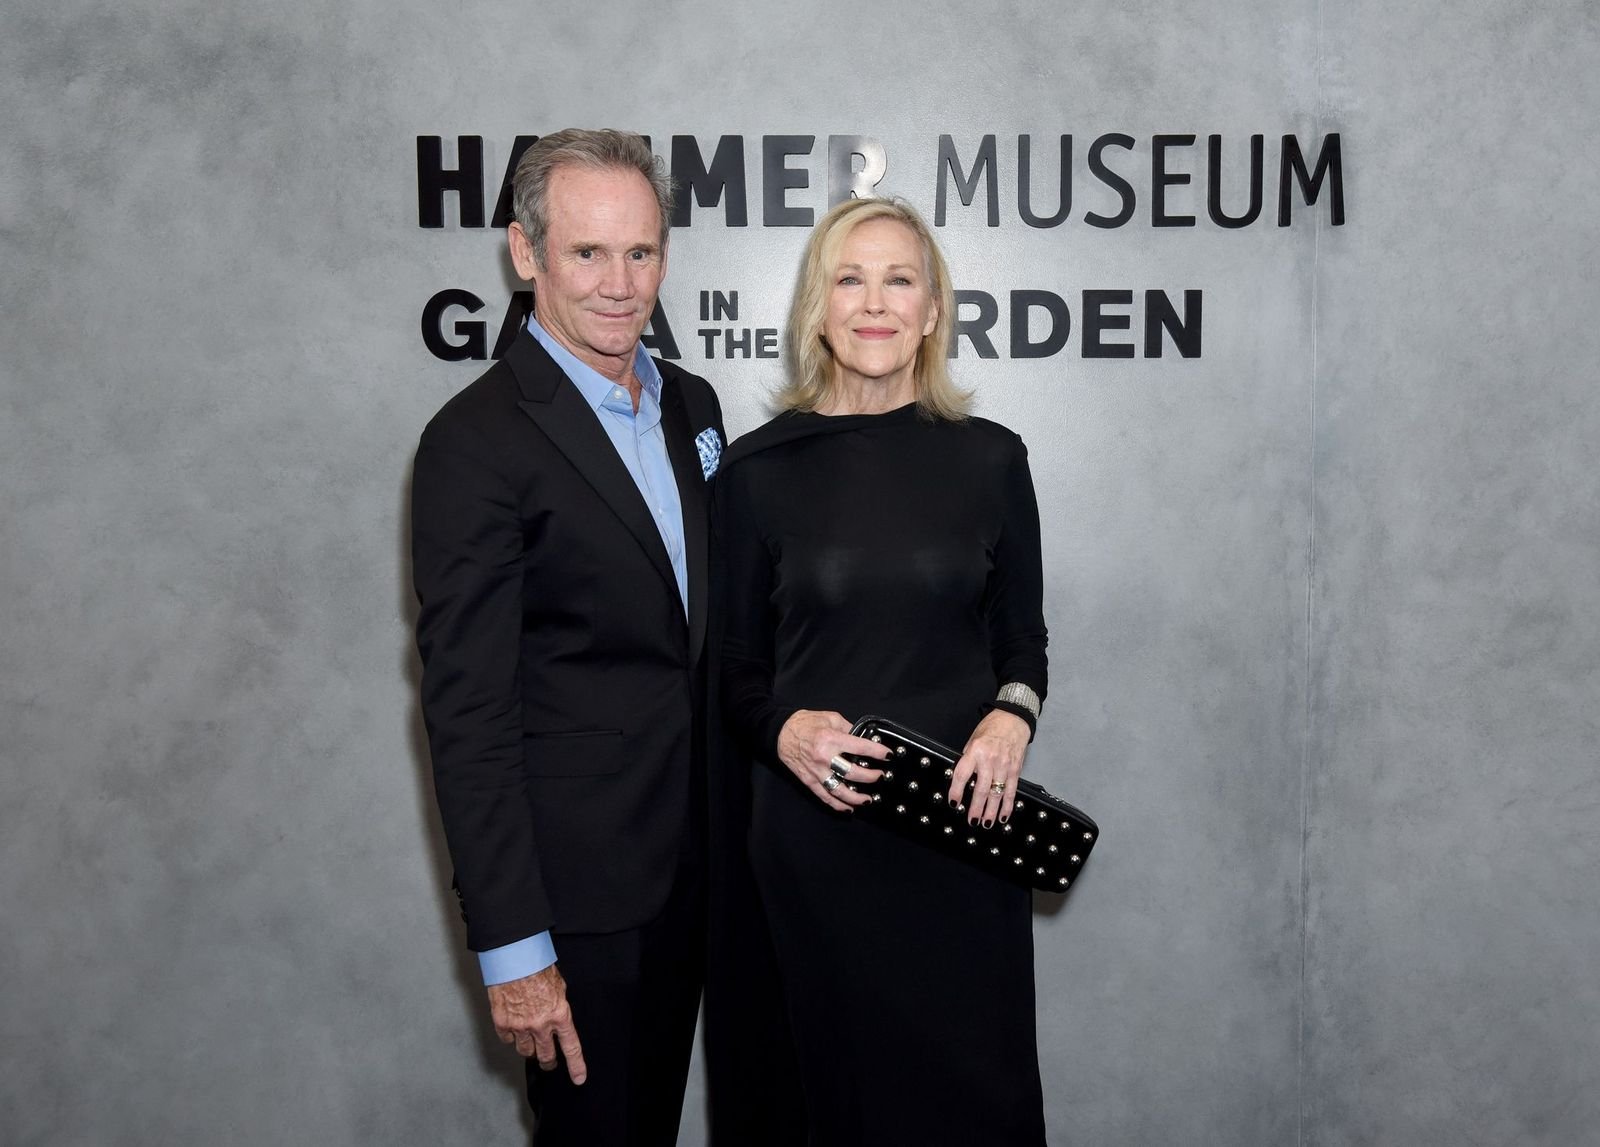 Bo Welch and Catherine O'Hara at Hammer Museum's 17th Annual Gala In The Garden on October 12, 2019 | Photo: Getty Images